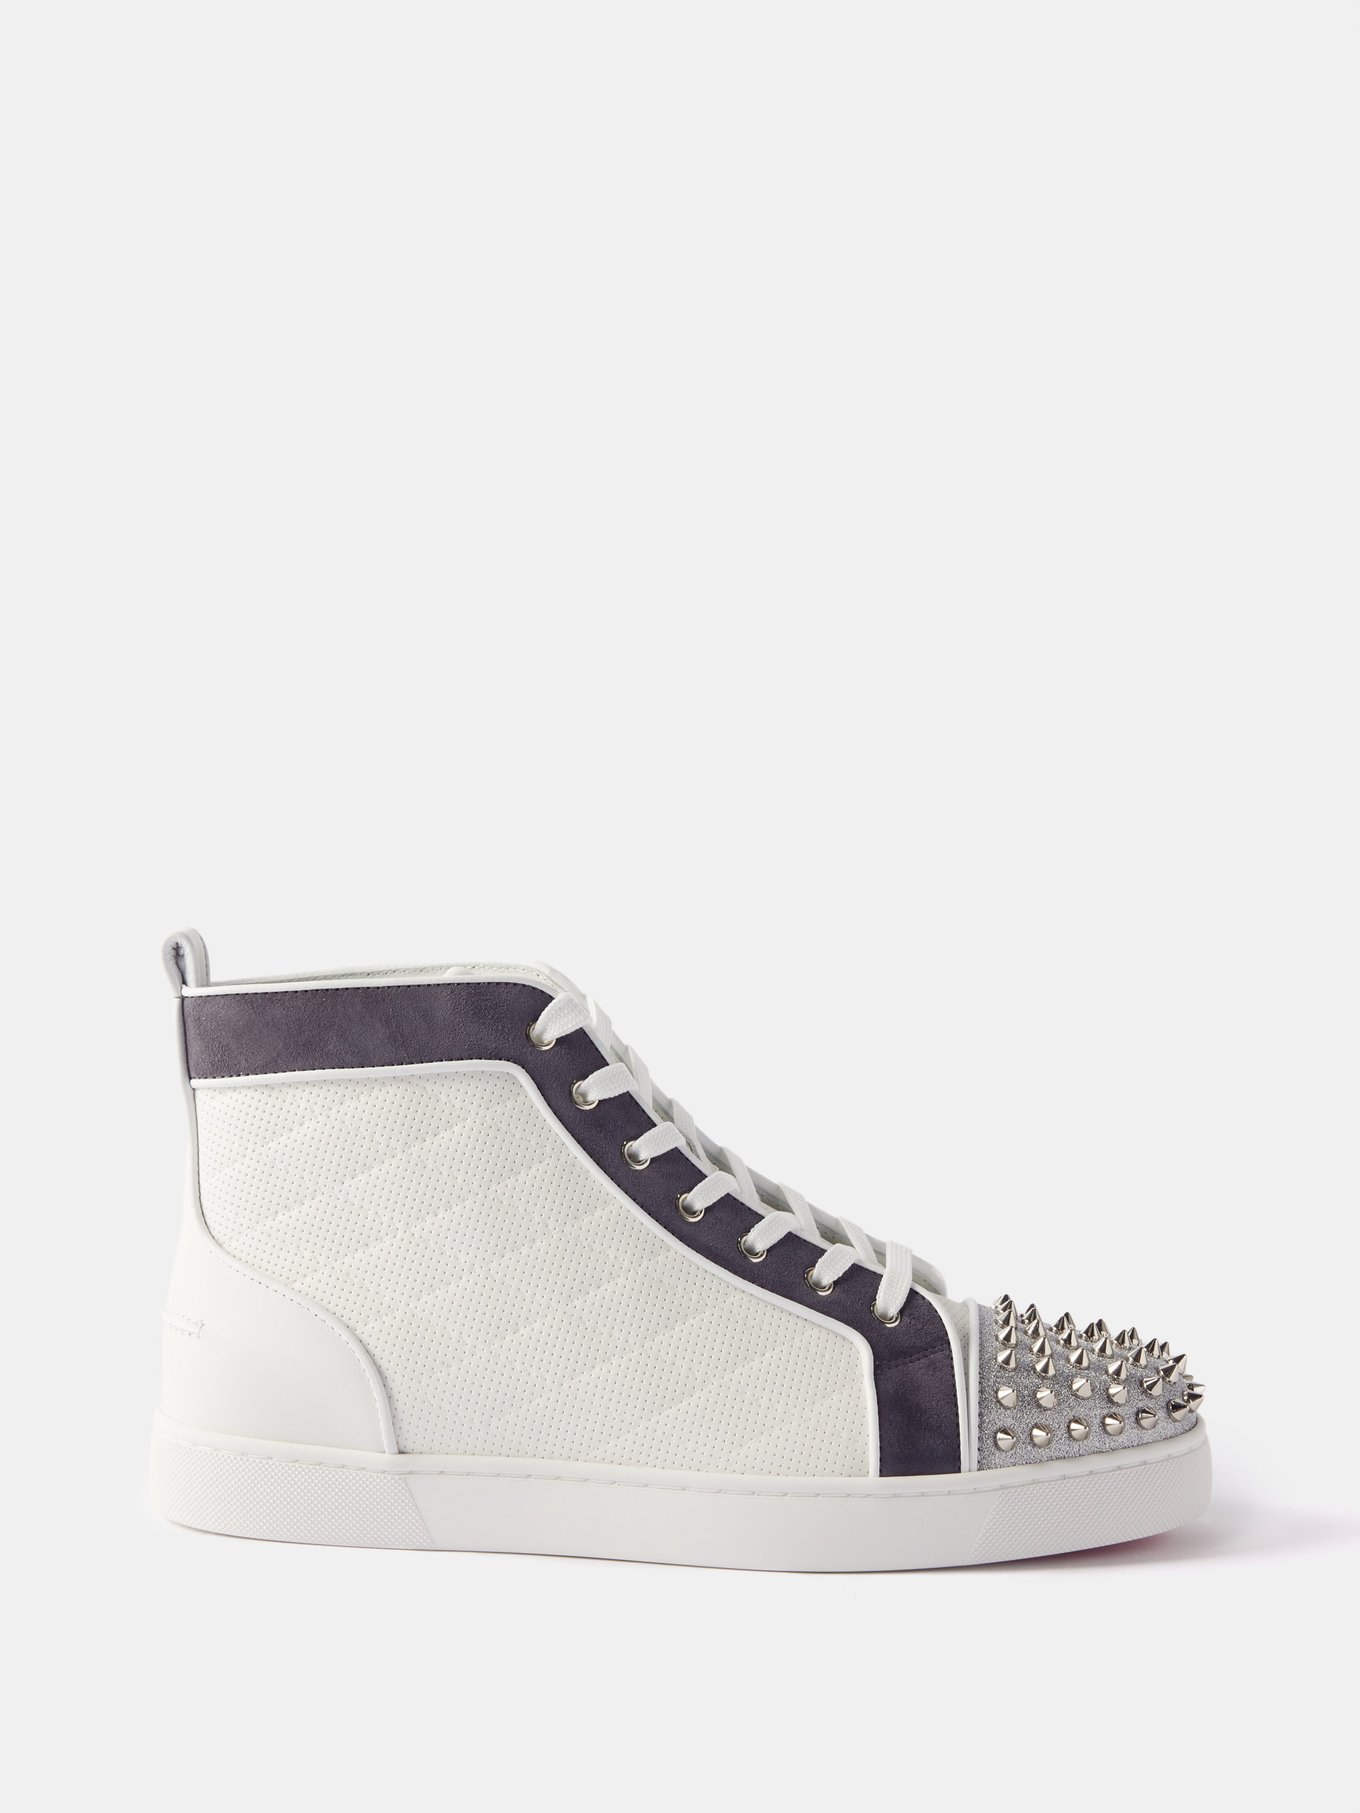 Christian Louboutin White Leather Louis Spikes Lace Up High Top Sneakers  Size 43.5 Christian Louboutin